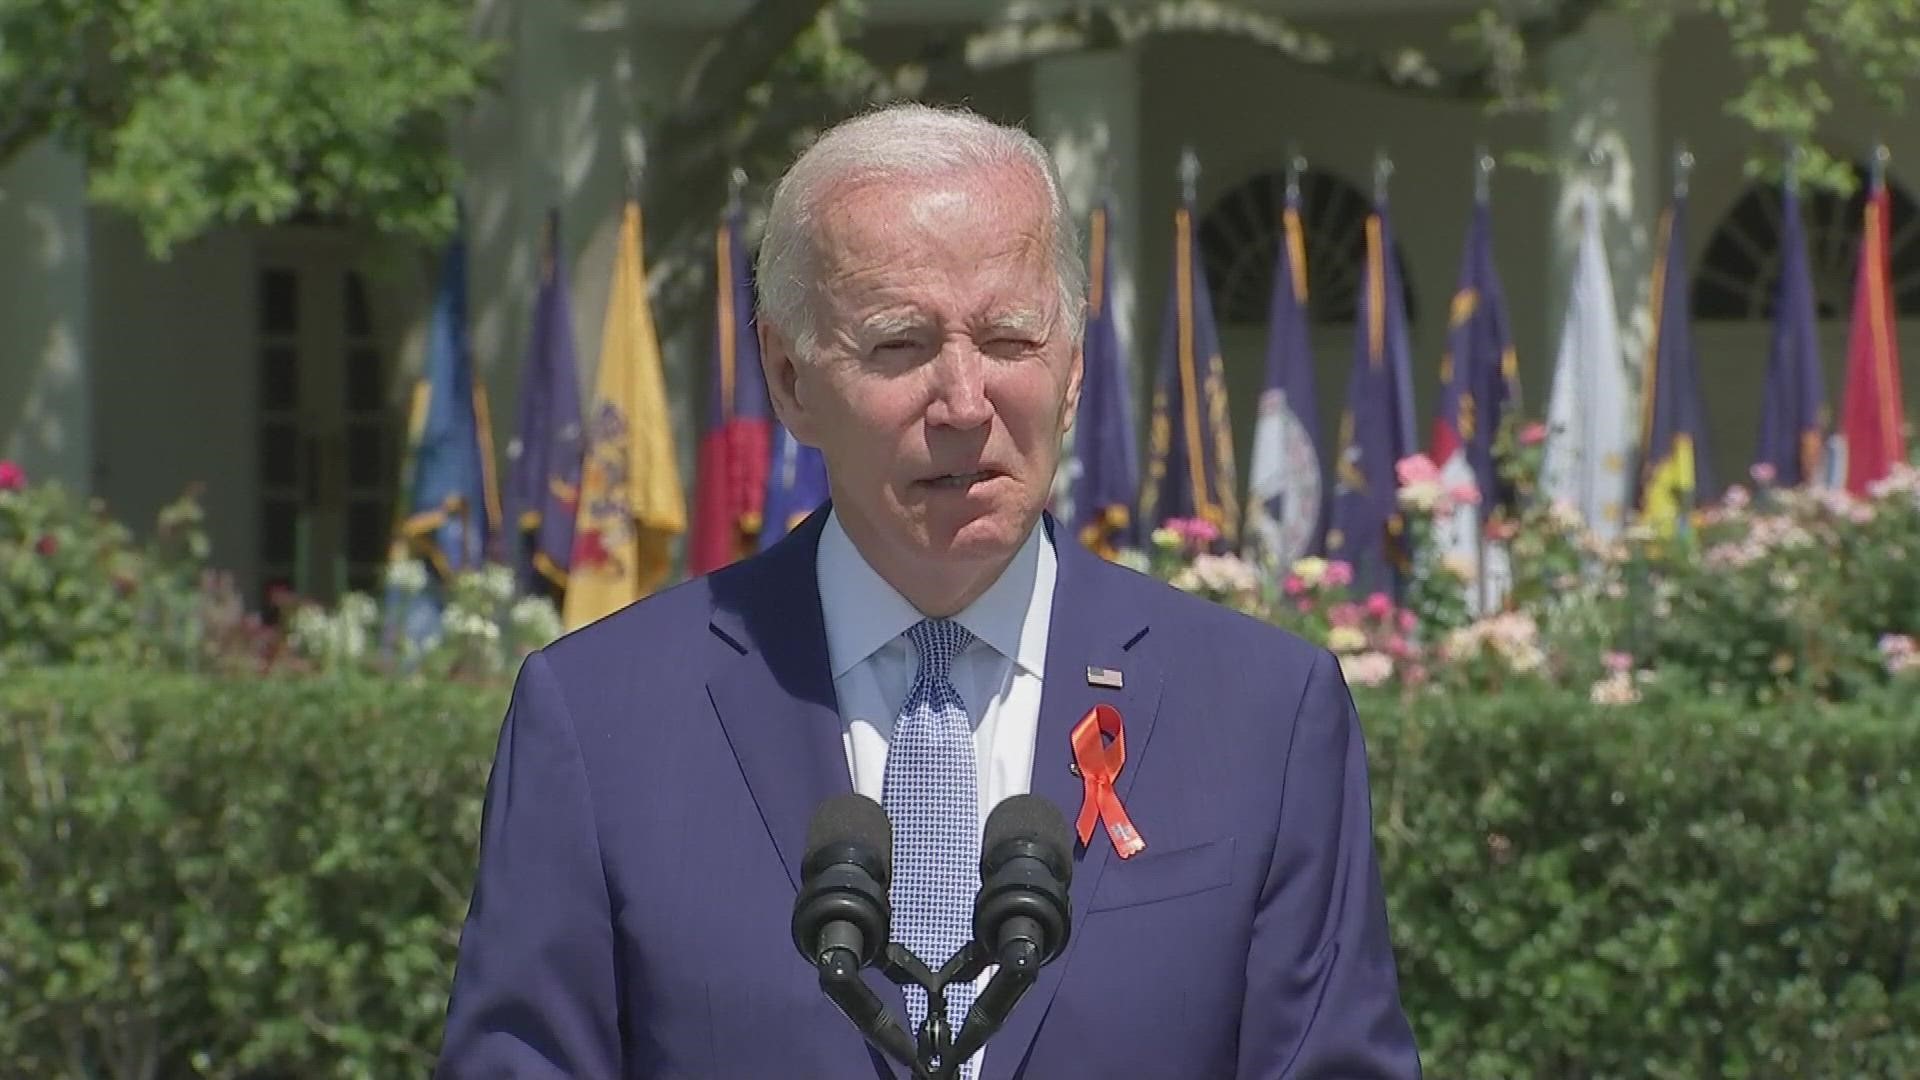 Manuel Oliver, father of Parkland shooting victim Joaquin Oliver, interrupted Joe Biden during a speech Monday: "You need to do more."